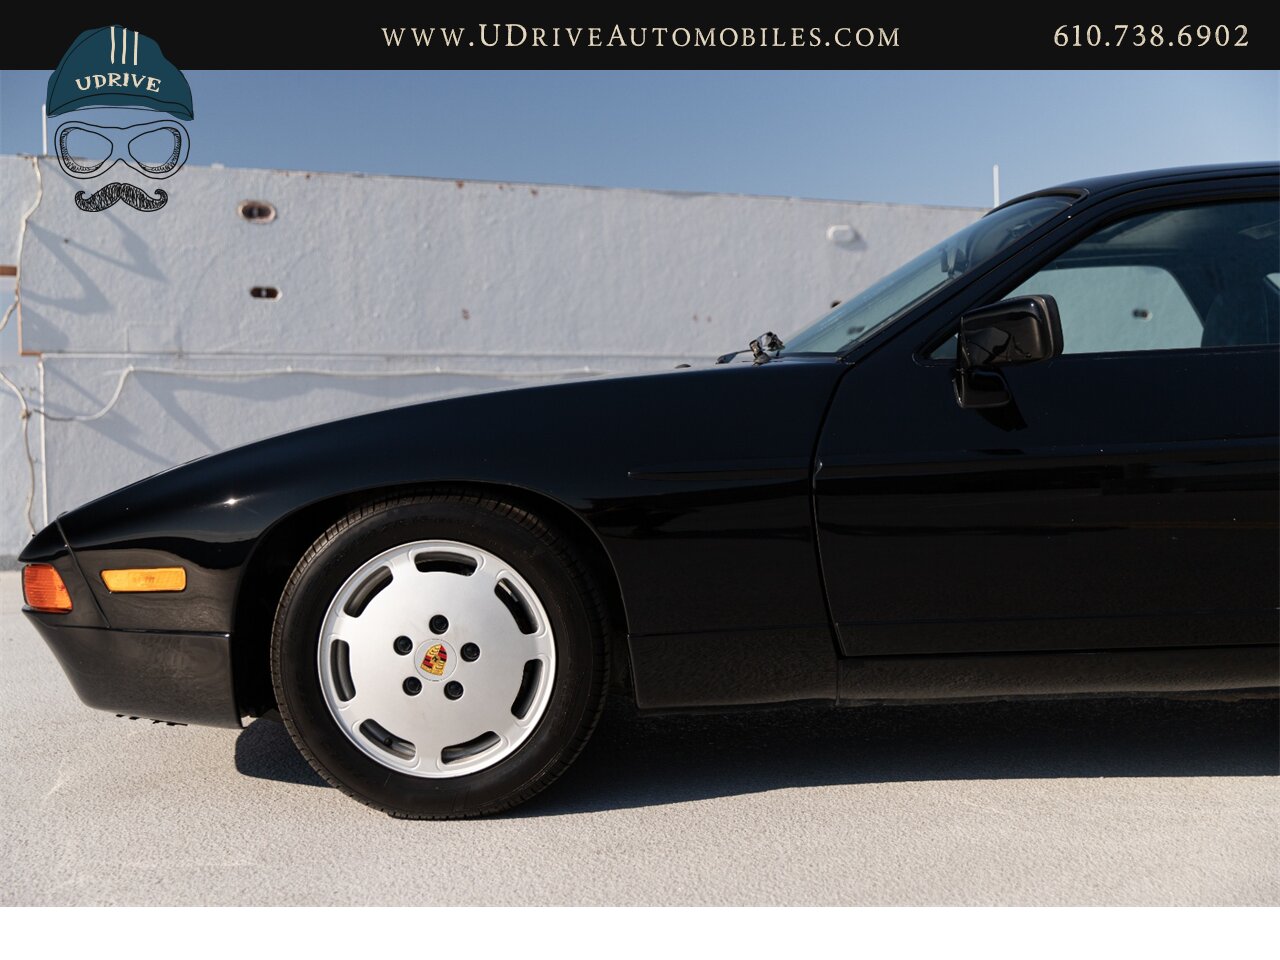 1990 Porsche 928 S4 $58k in Service History Since 2014   - Photo 6 - West Chester, PA 19382